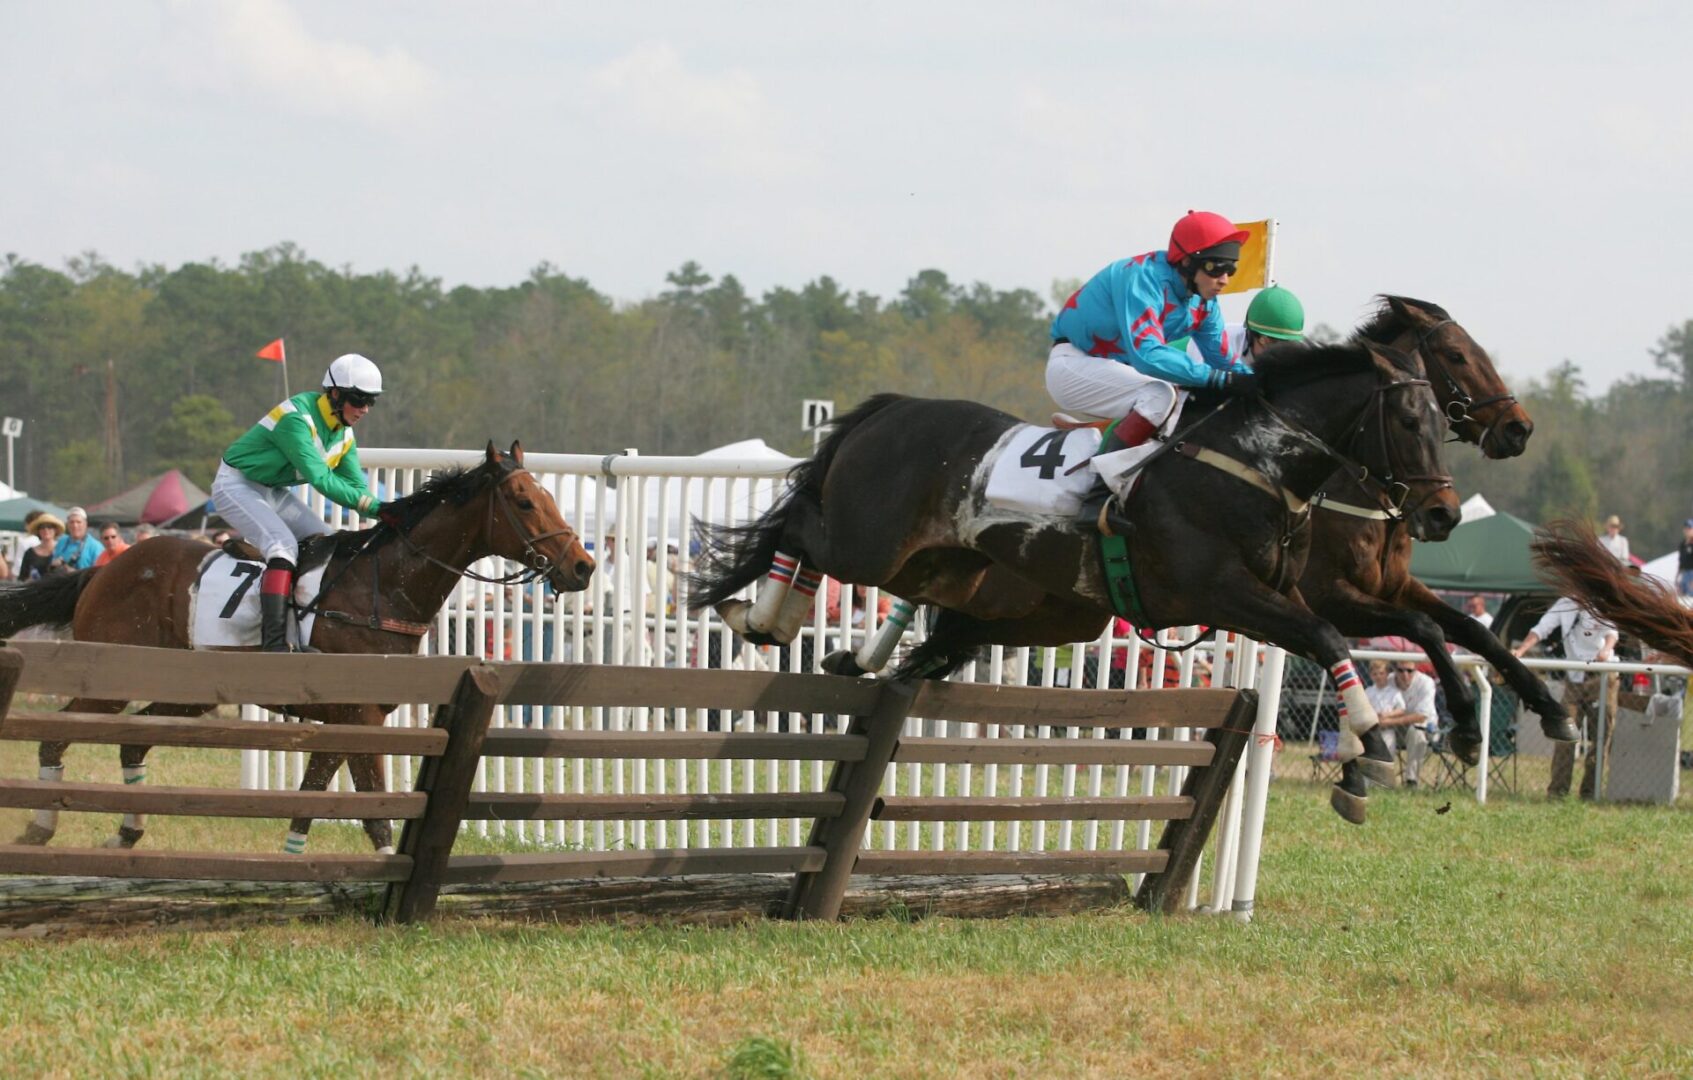 A horse race with two riders jumping over the fence.